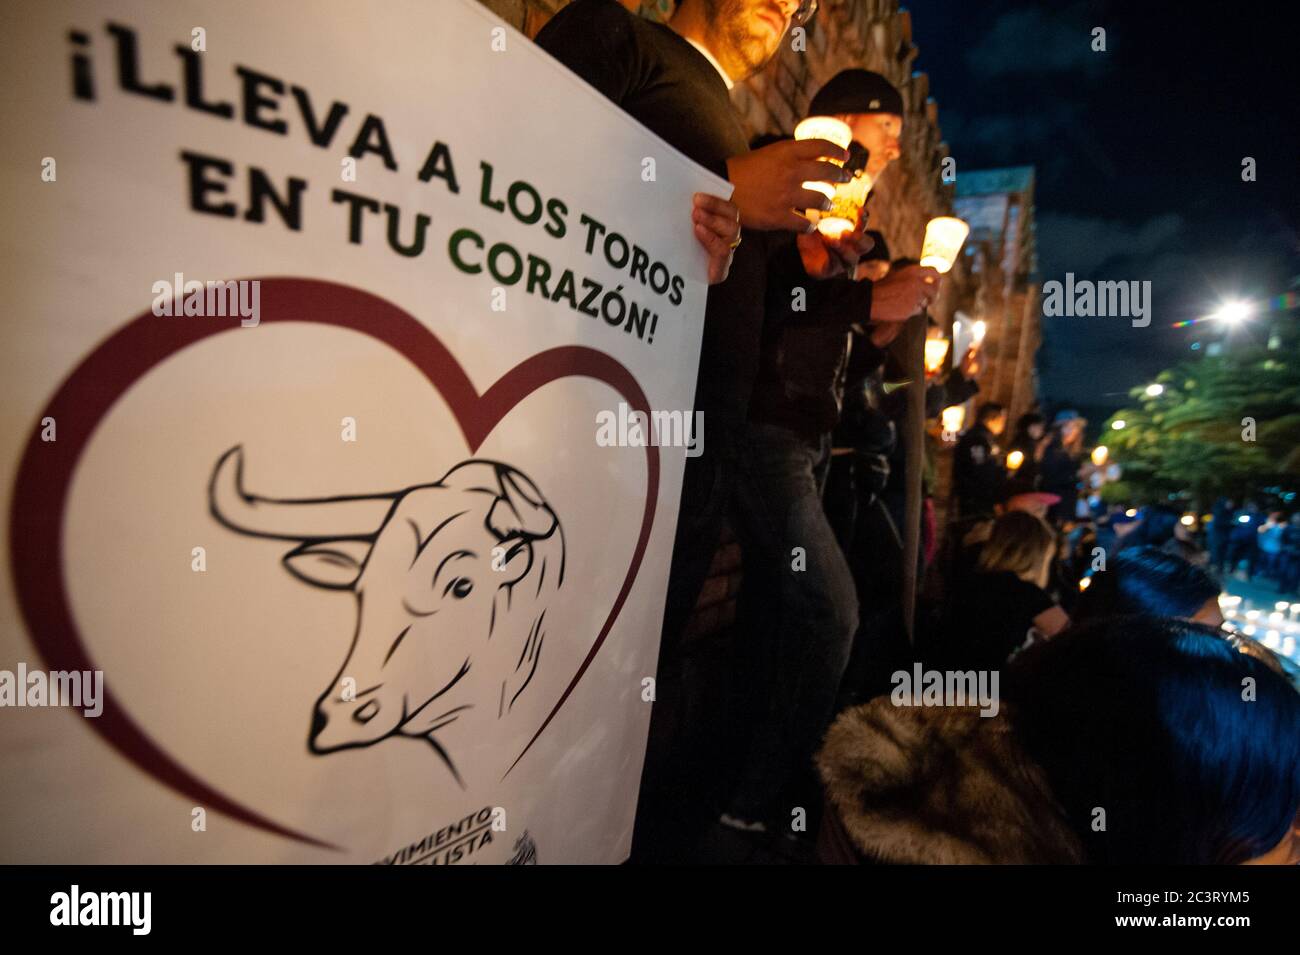 Demonstrators gather at the Santamaria Bullfight ring in Bogota to homenage and protest to stop the bullfighting season that takes places in Bogota du Stock Photo